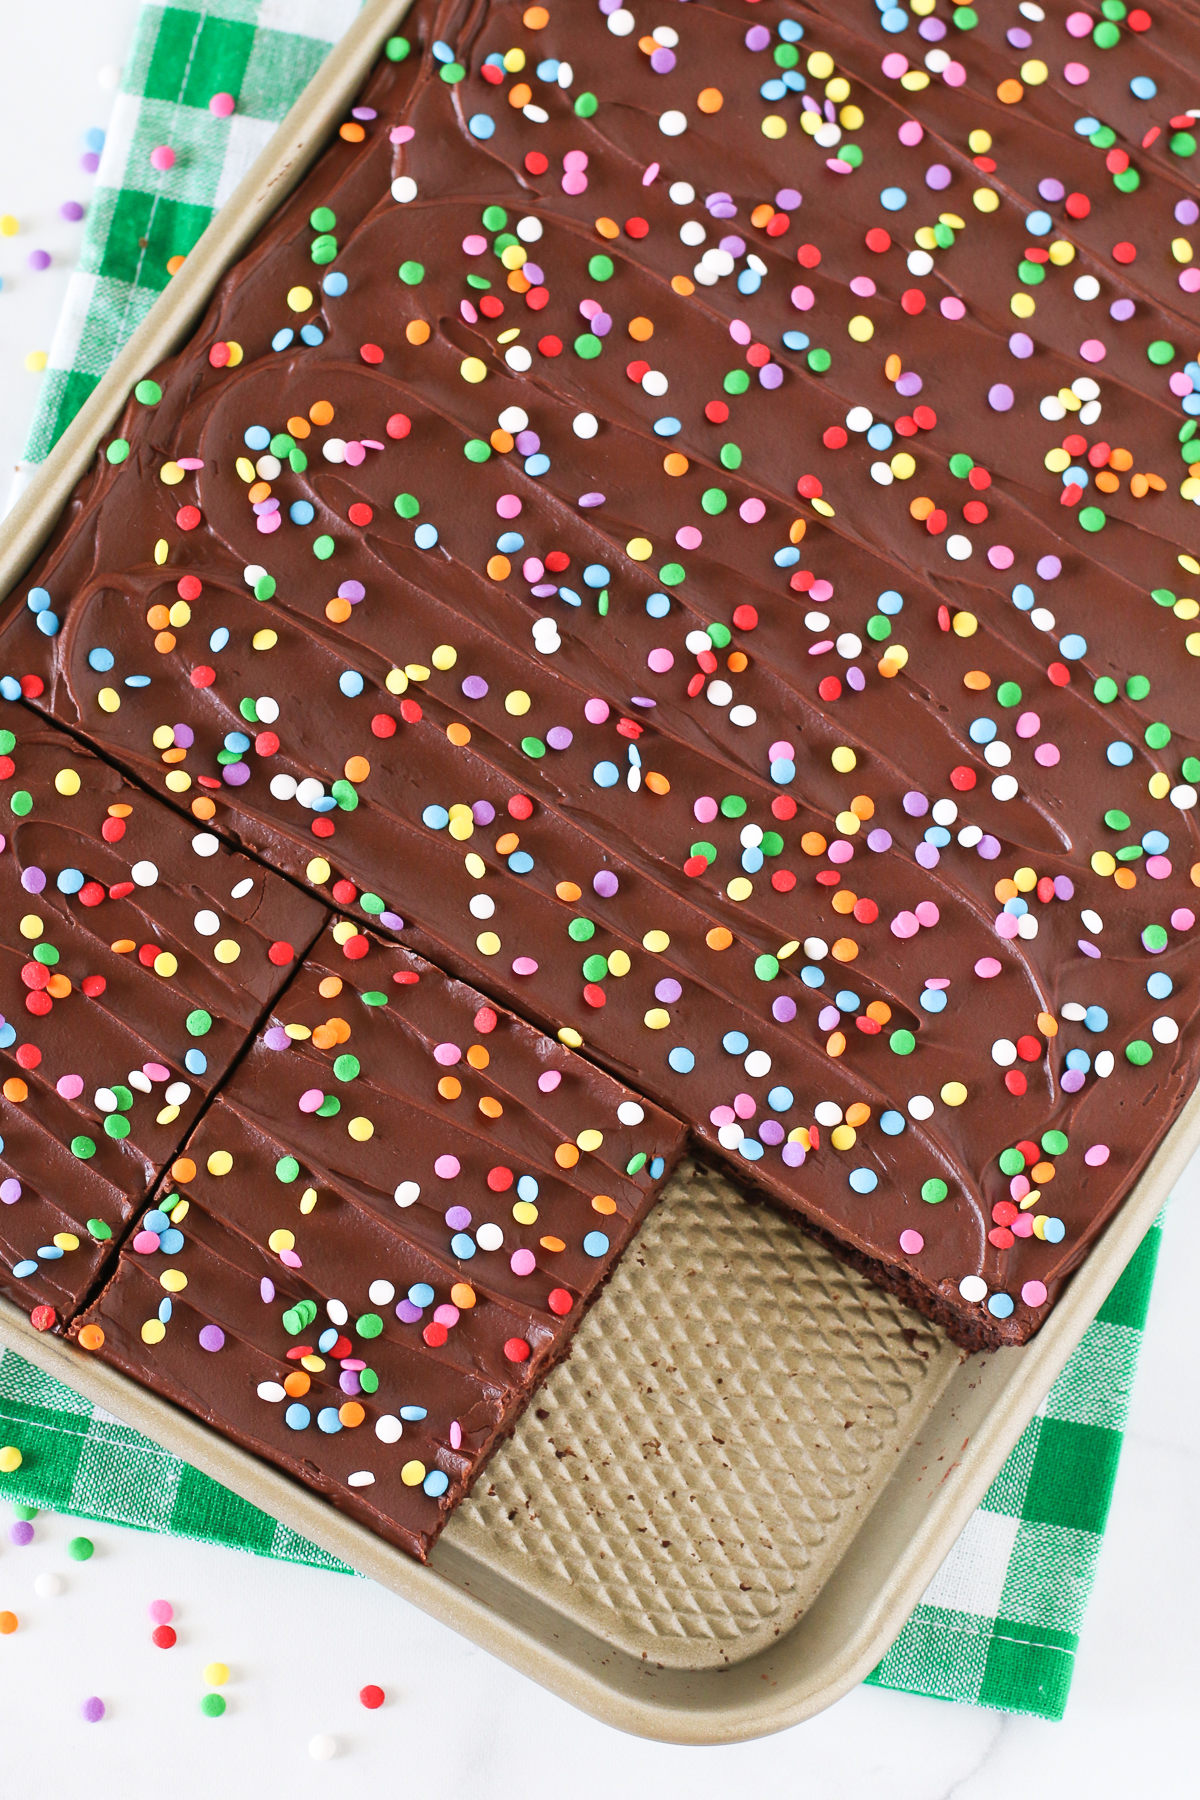 Gluten Free Vegan Chocolate Frosted Brownies. Fudgy, chocolate frosted brownie with colorful sprinkles. The perfect chocolate treat for any celebration!